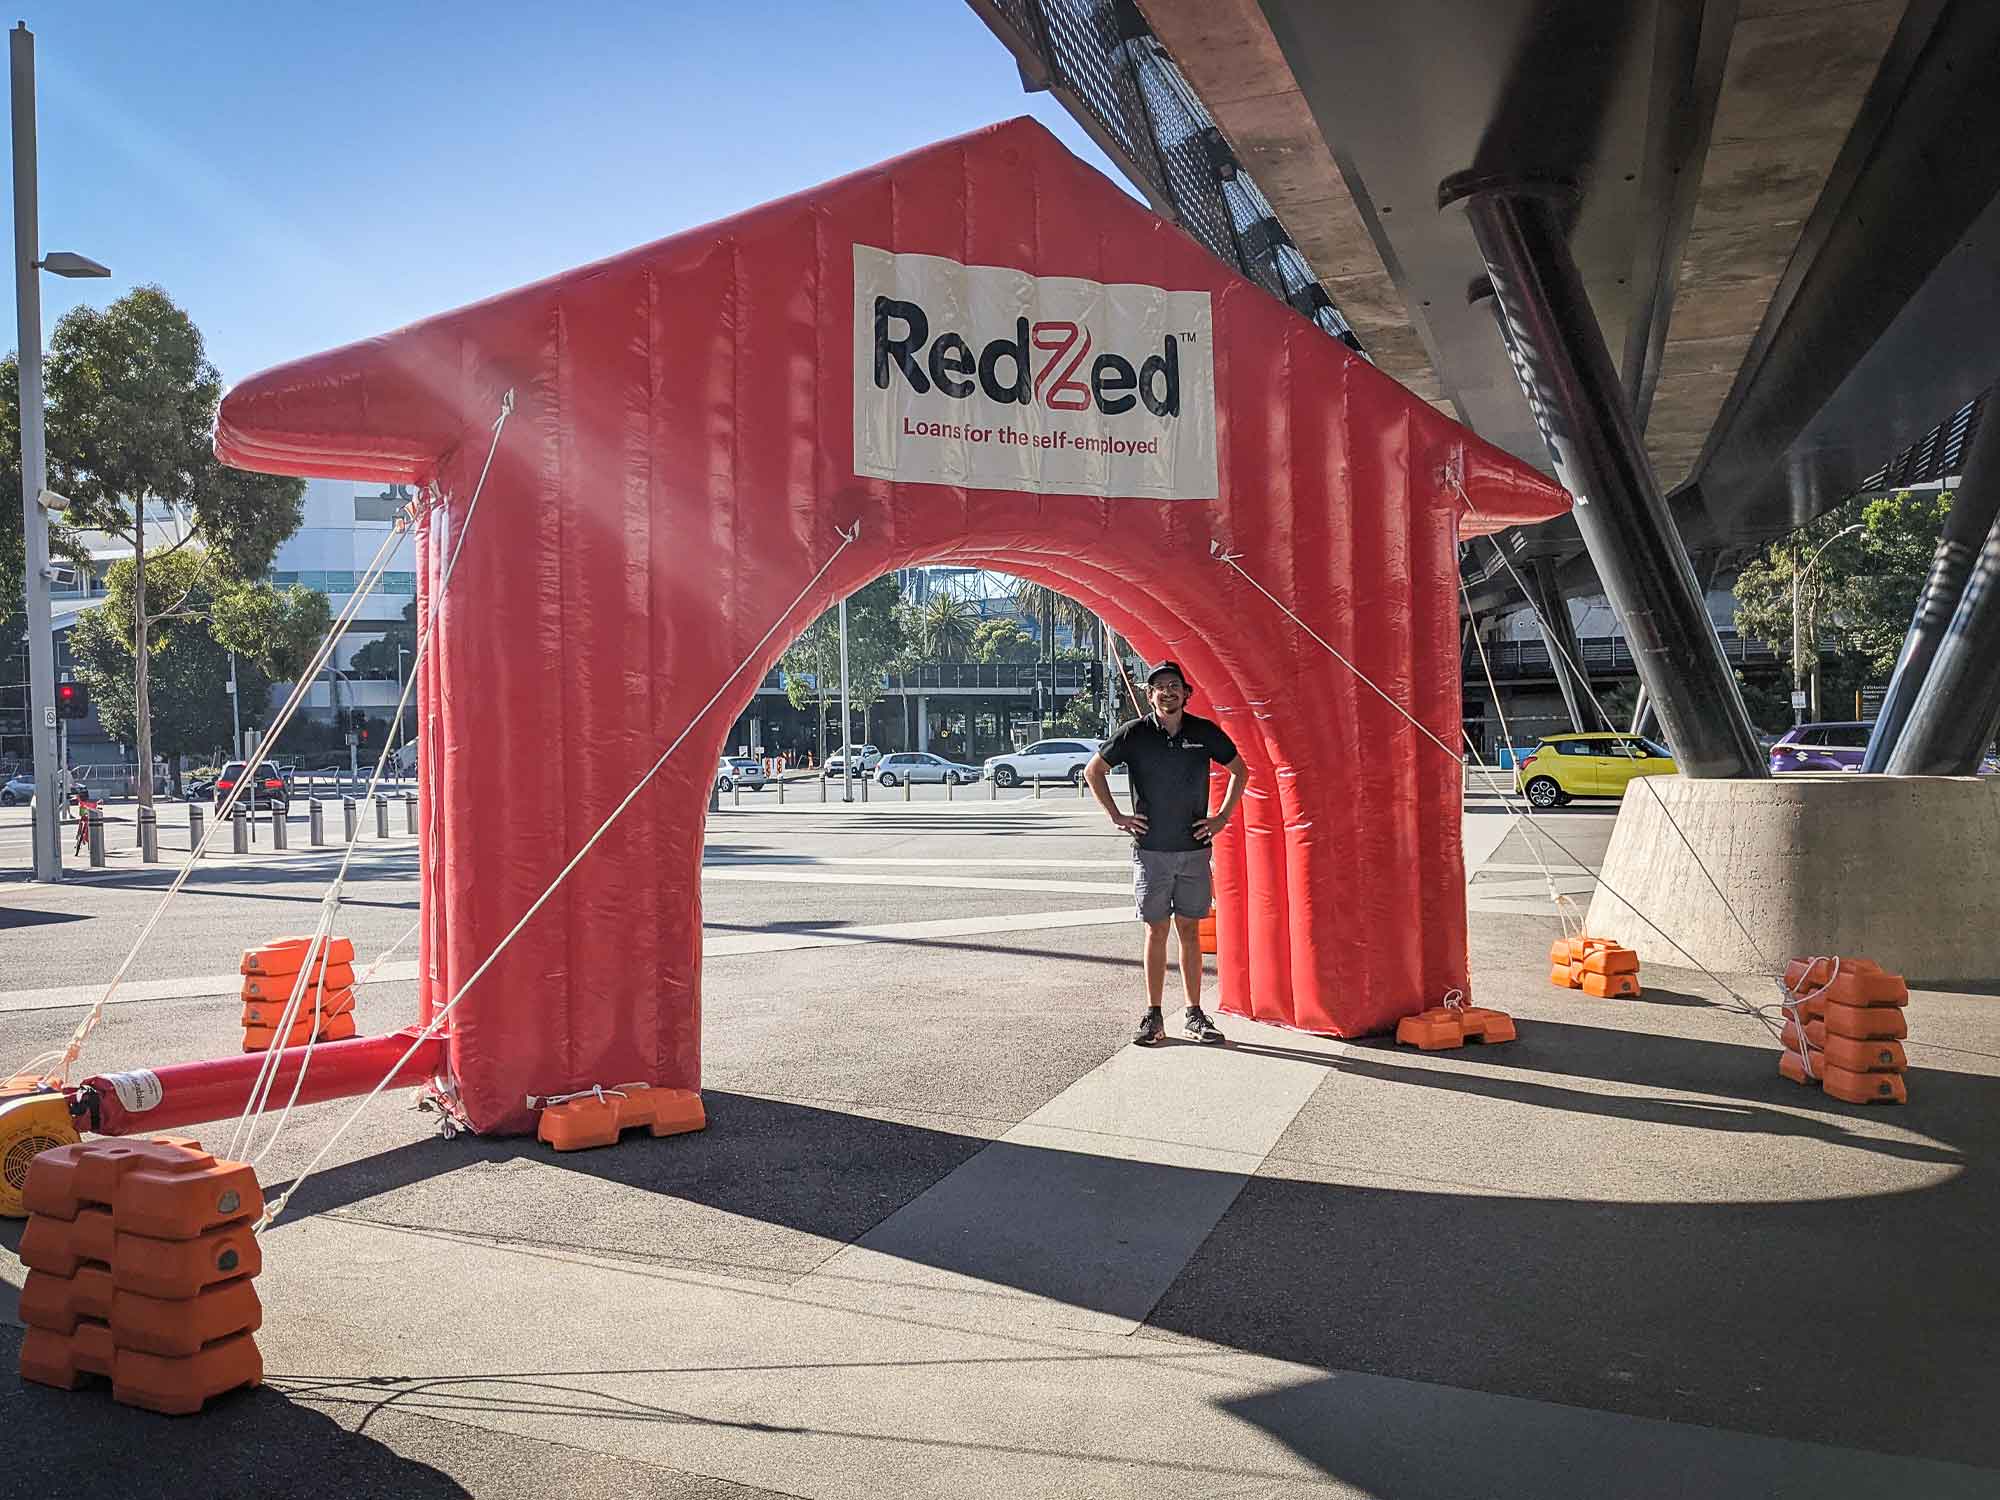 The Arch was specially designed to six metres wide and 4 metres high to accommodate the height restrictions under Olympic Boulevard.